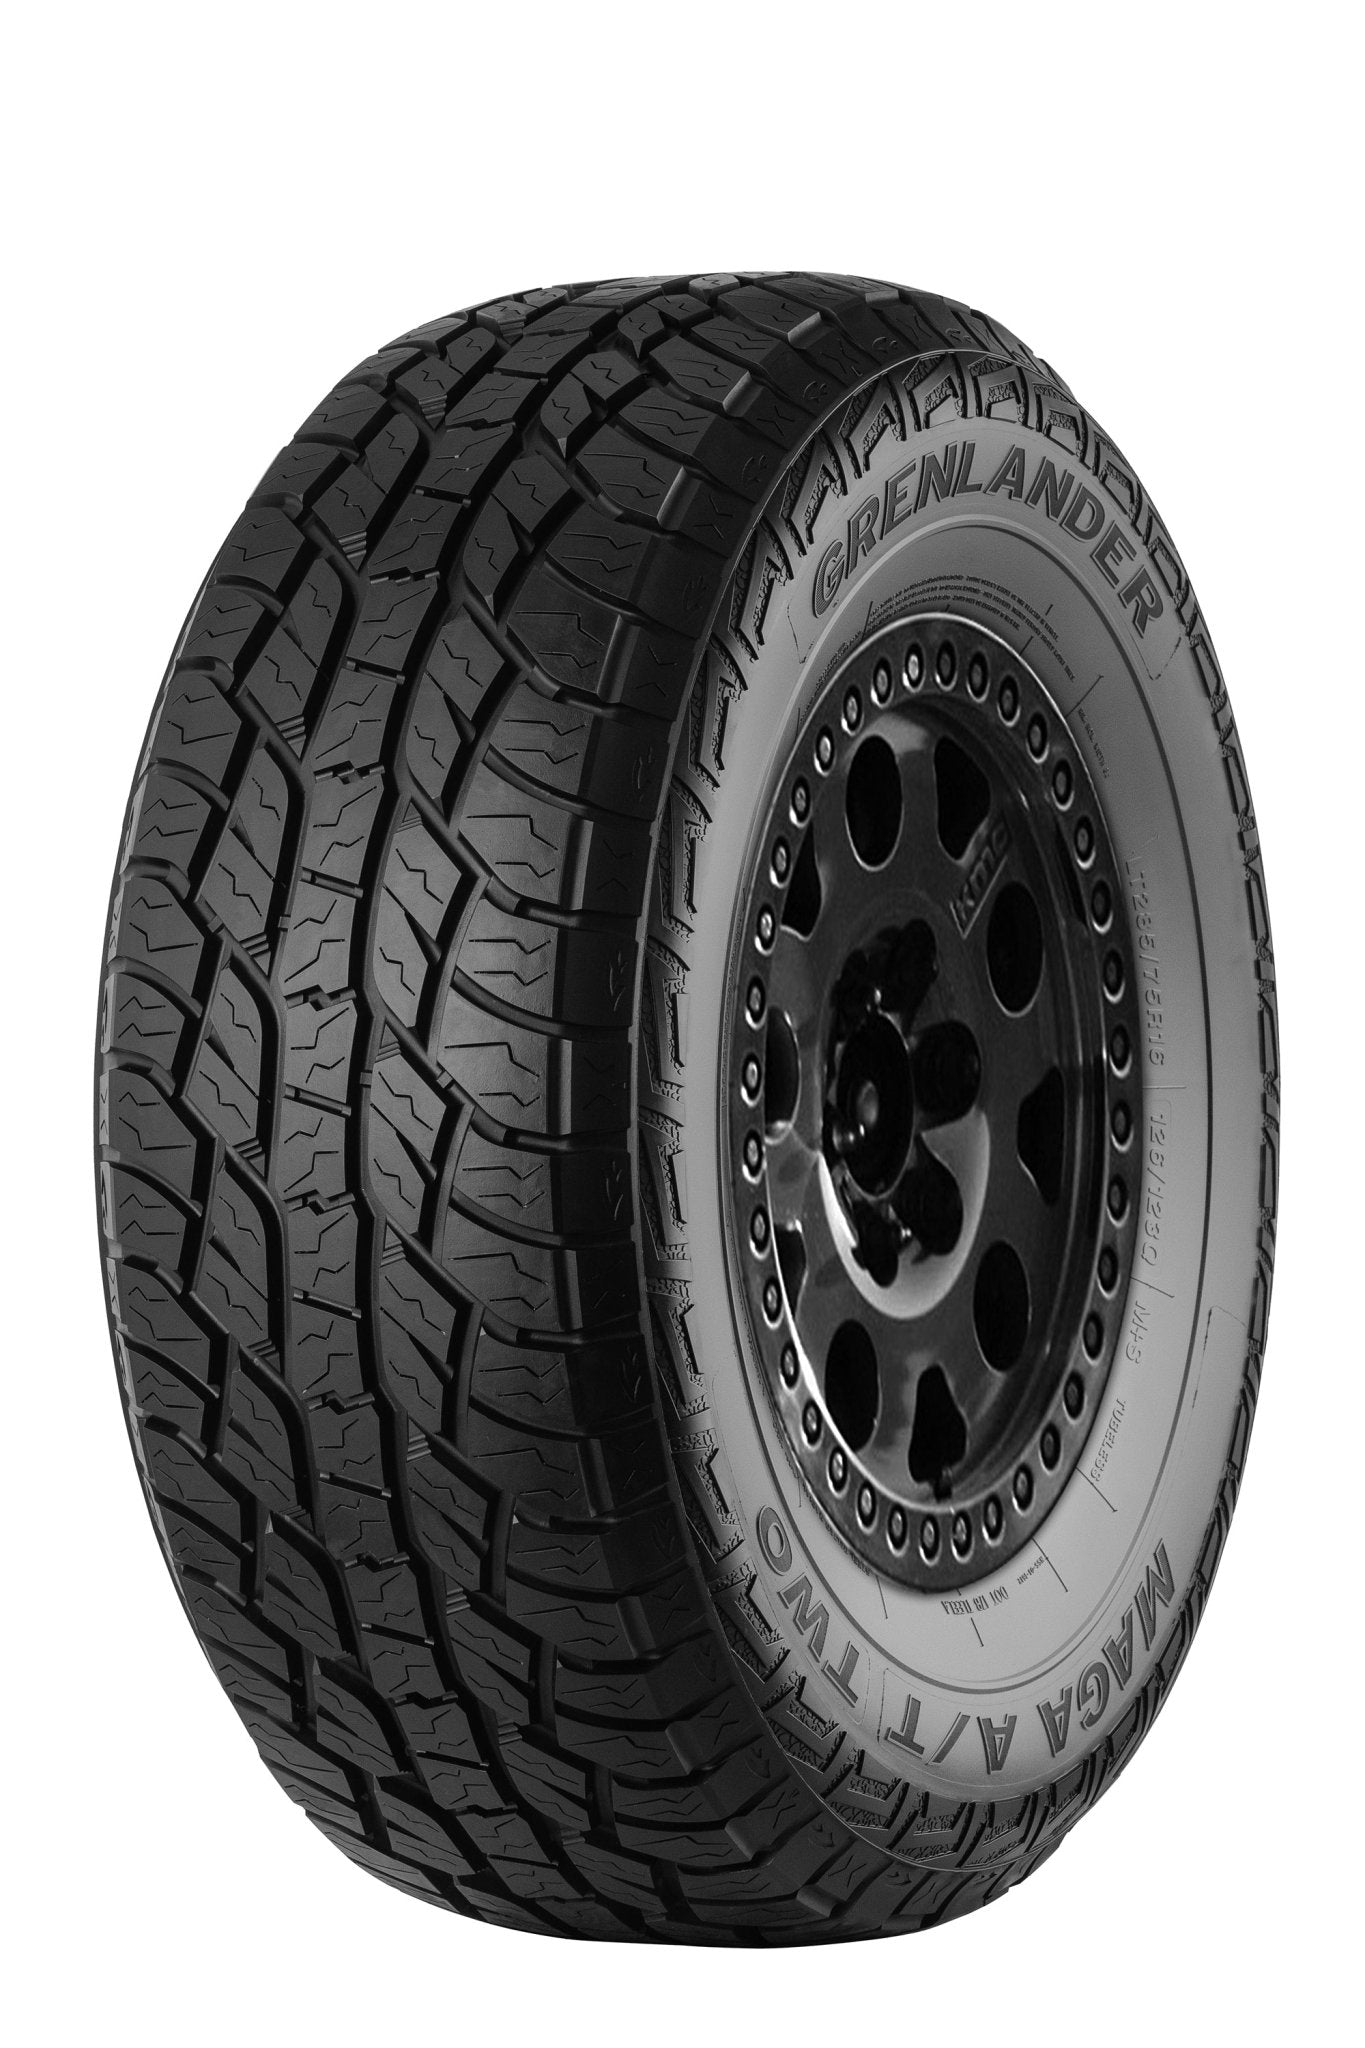 265/75R16 GRENLANDER MAGA A/T TWO LIGHT TRUCK - Toee Tire